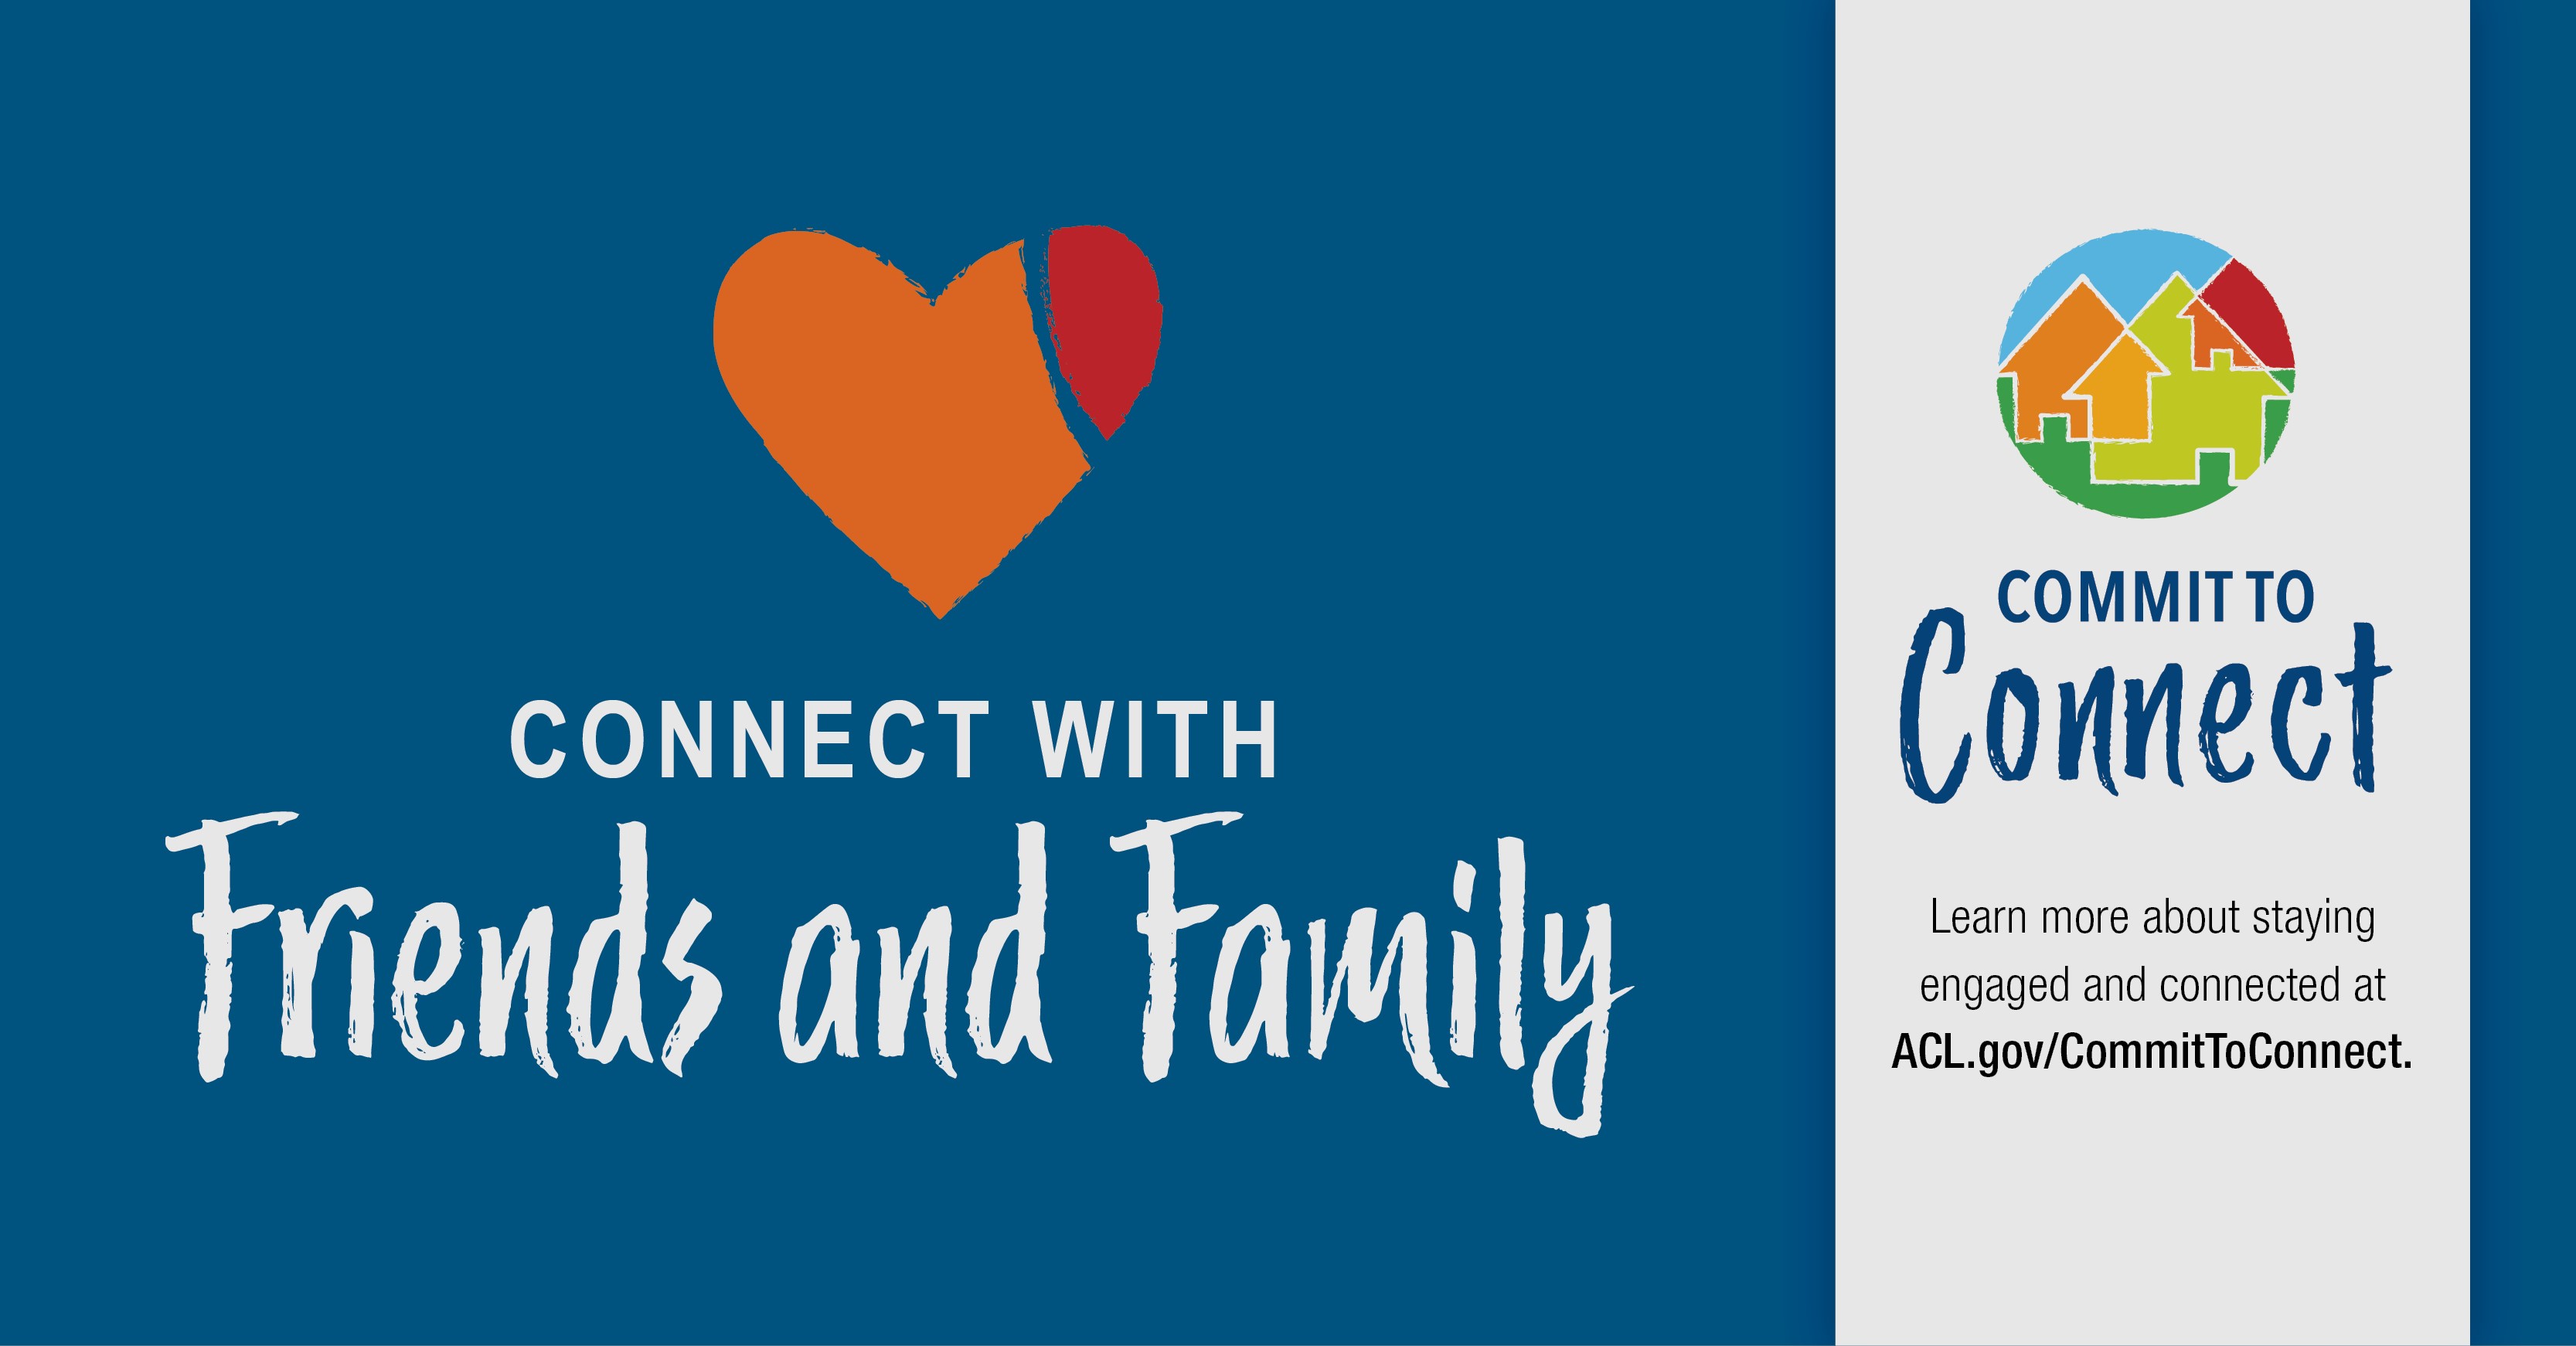 Commit to connect through friends and family. Learn more about staying connected over the holidays at acl.gov/engage.